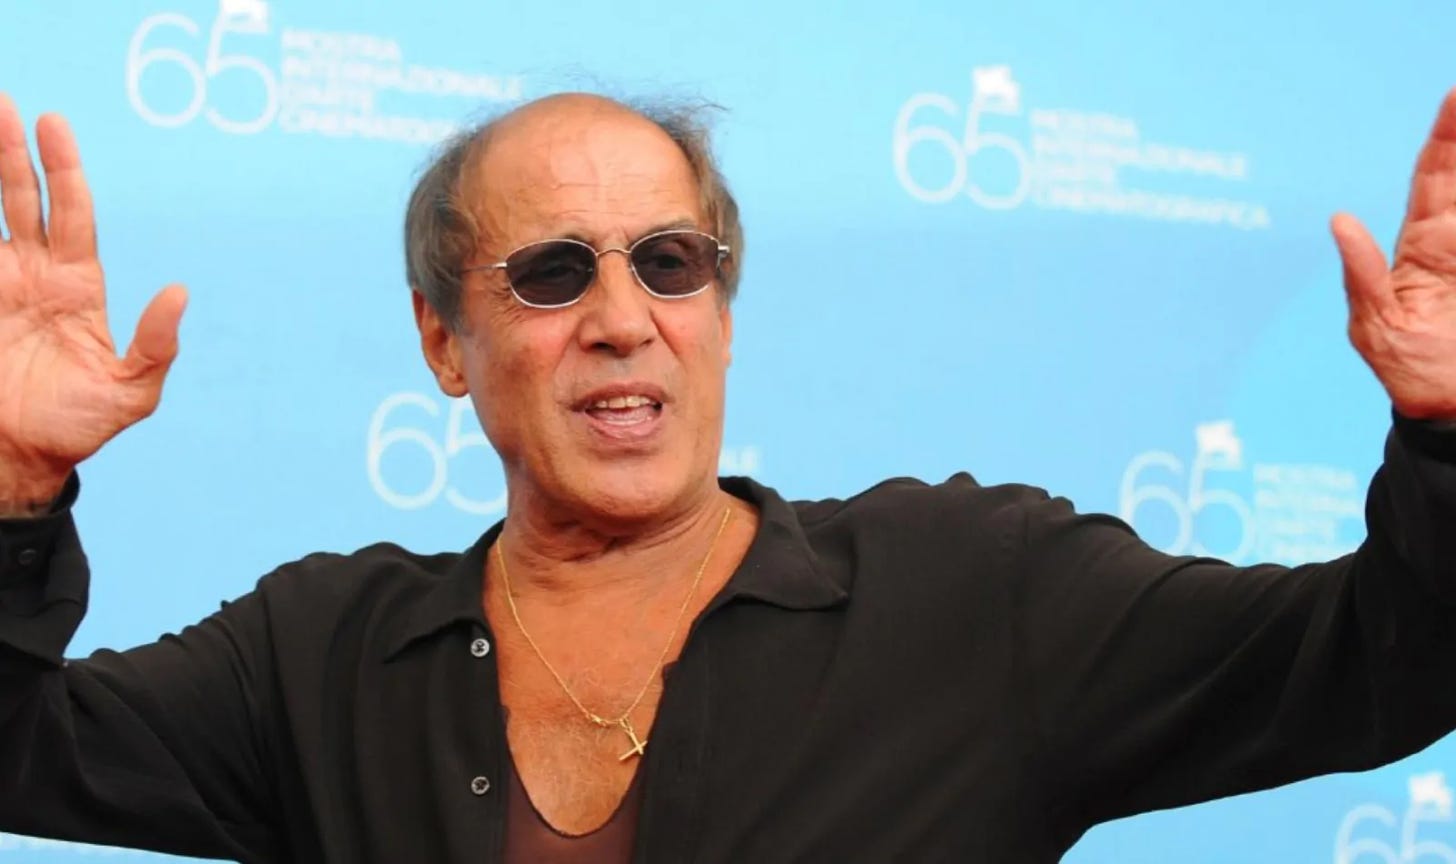 Adriano Celentano in the hospital? Here's what happened